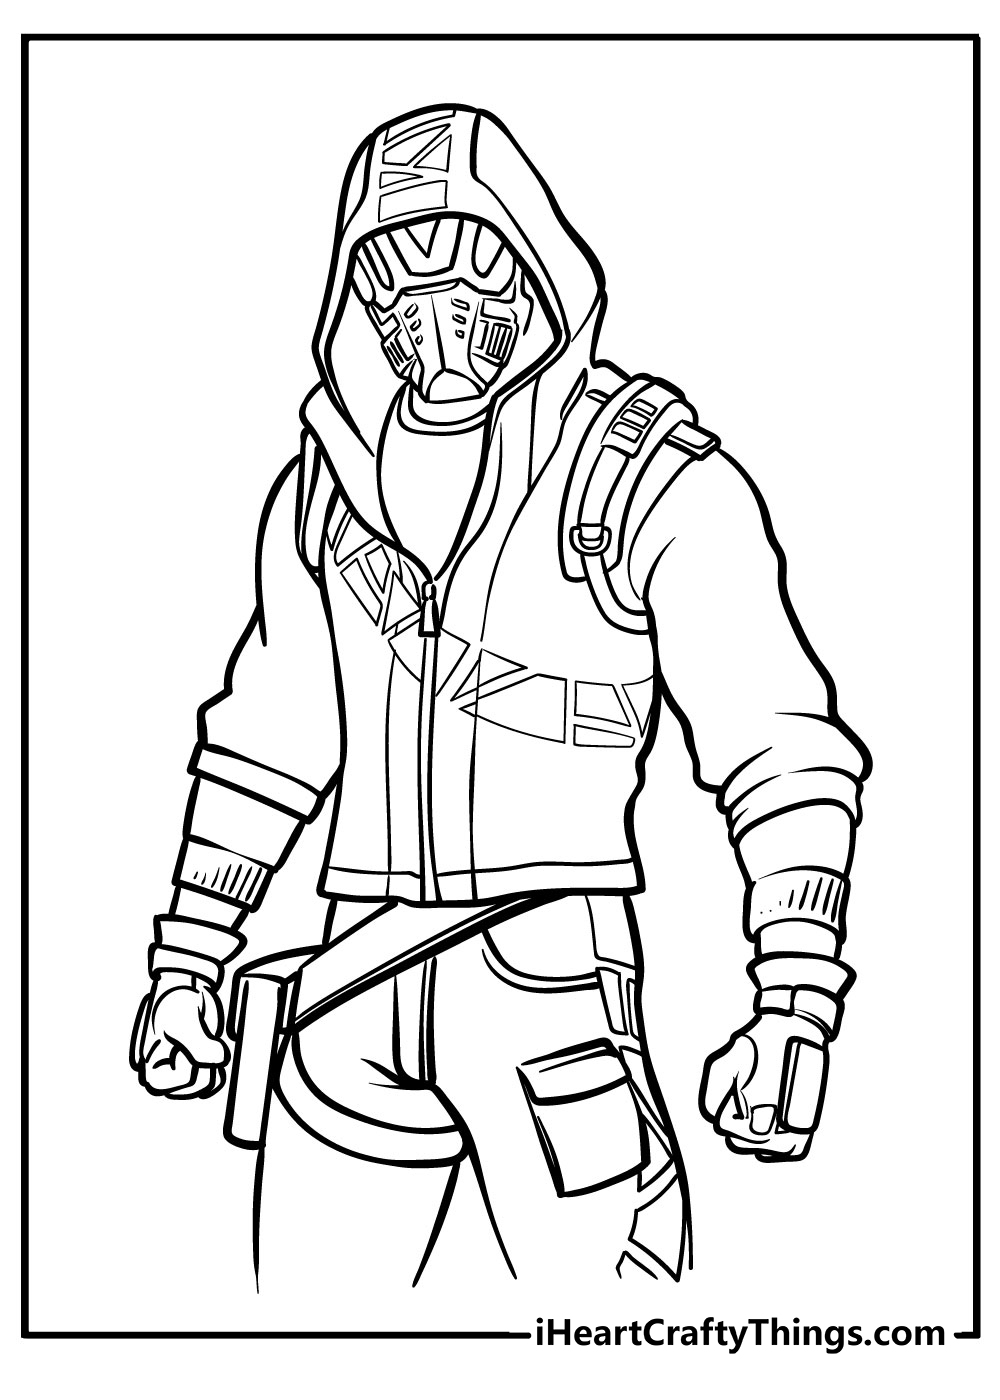 20 Brand New Fortnite Coloring Pages - Free to Print and Color.